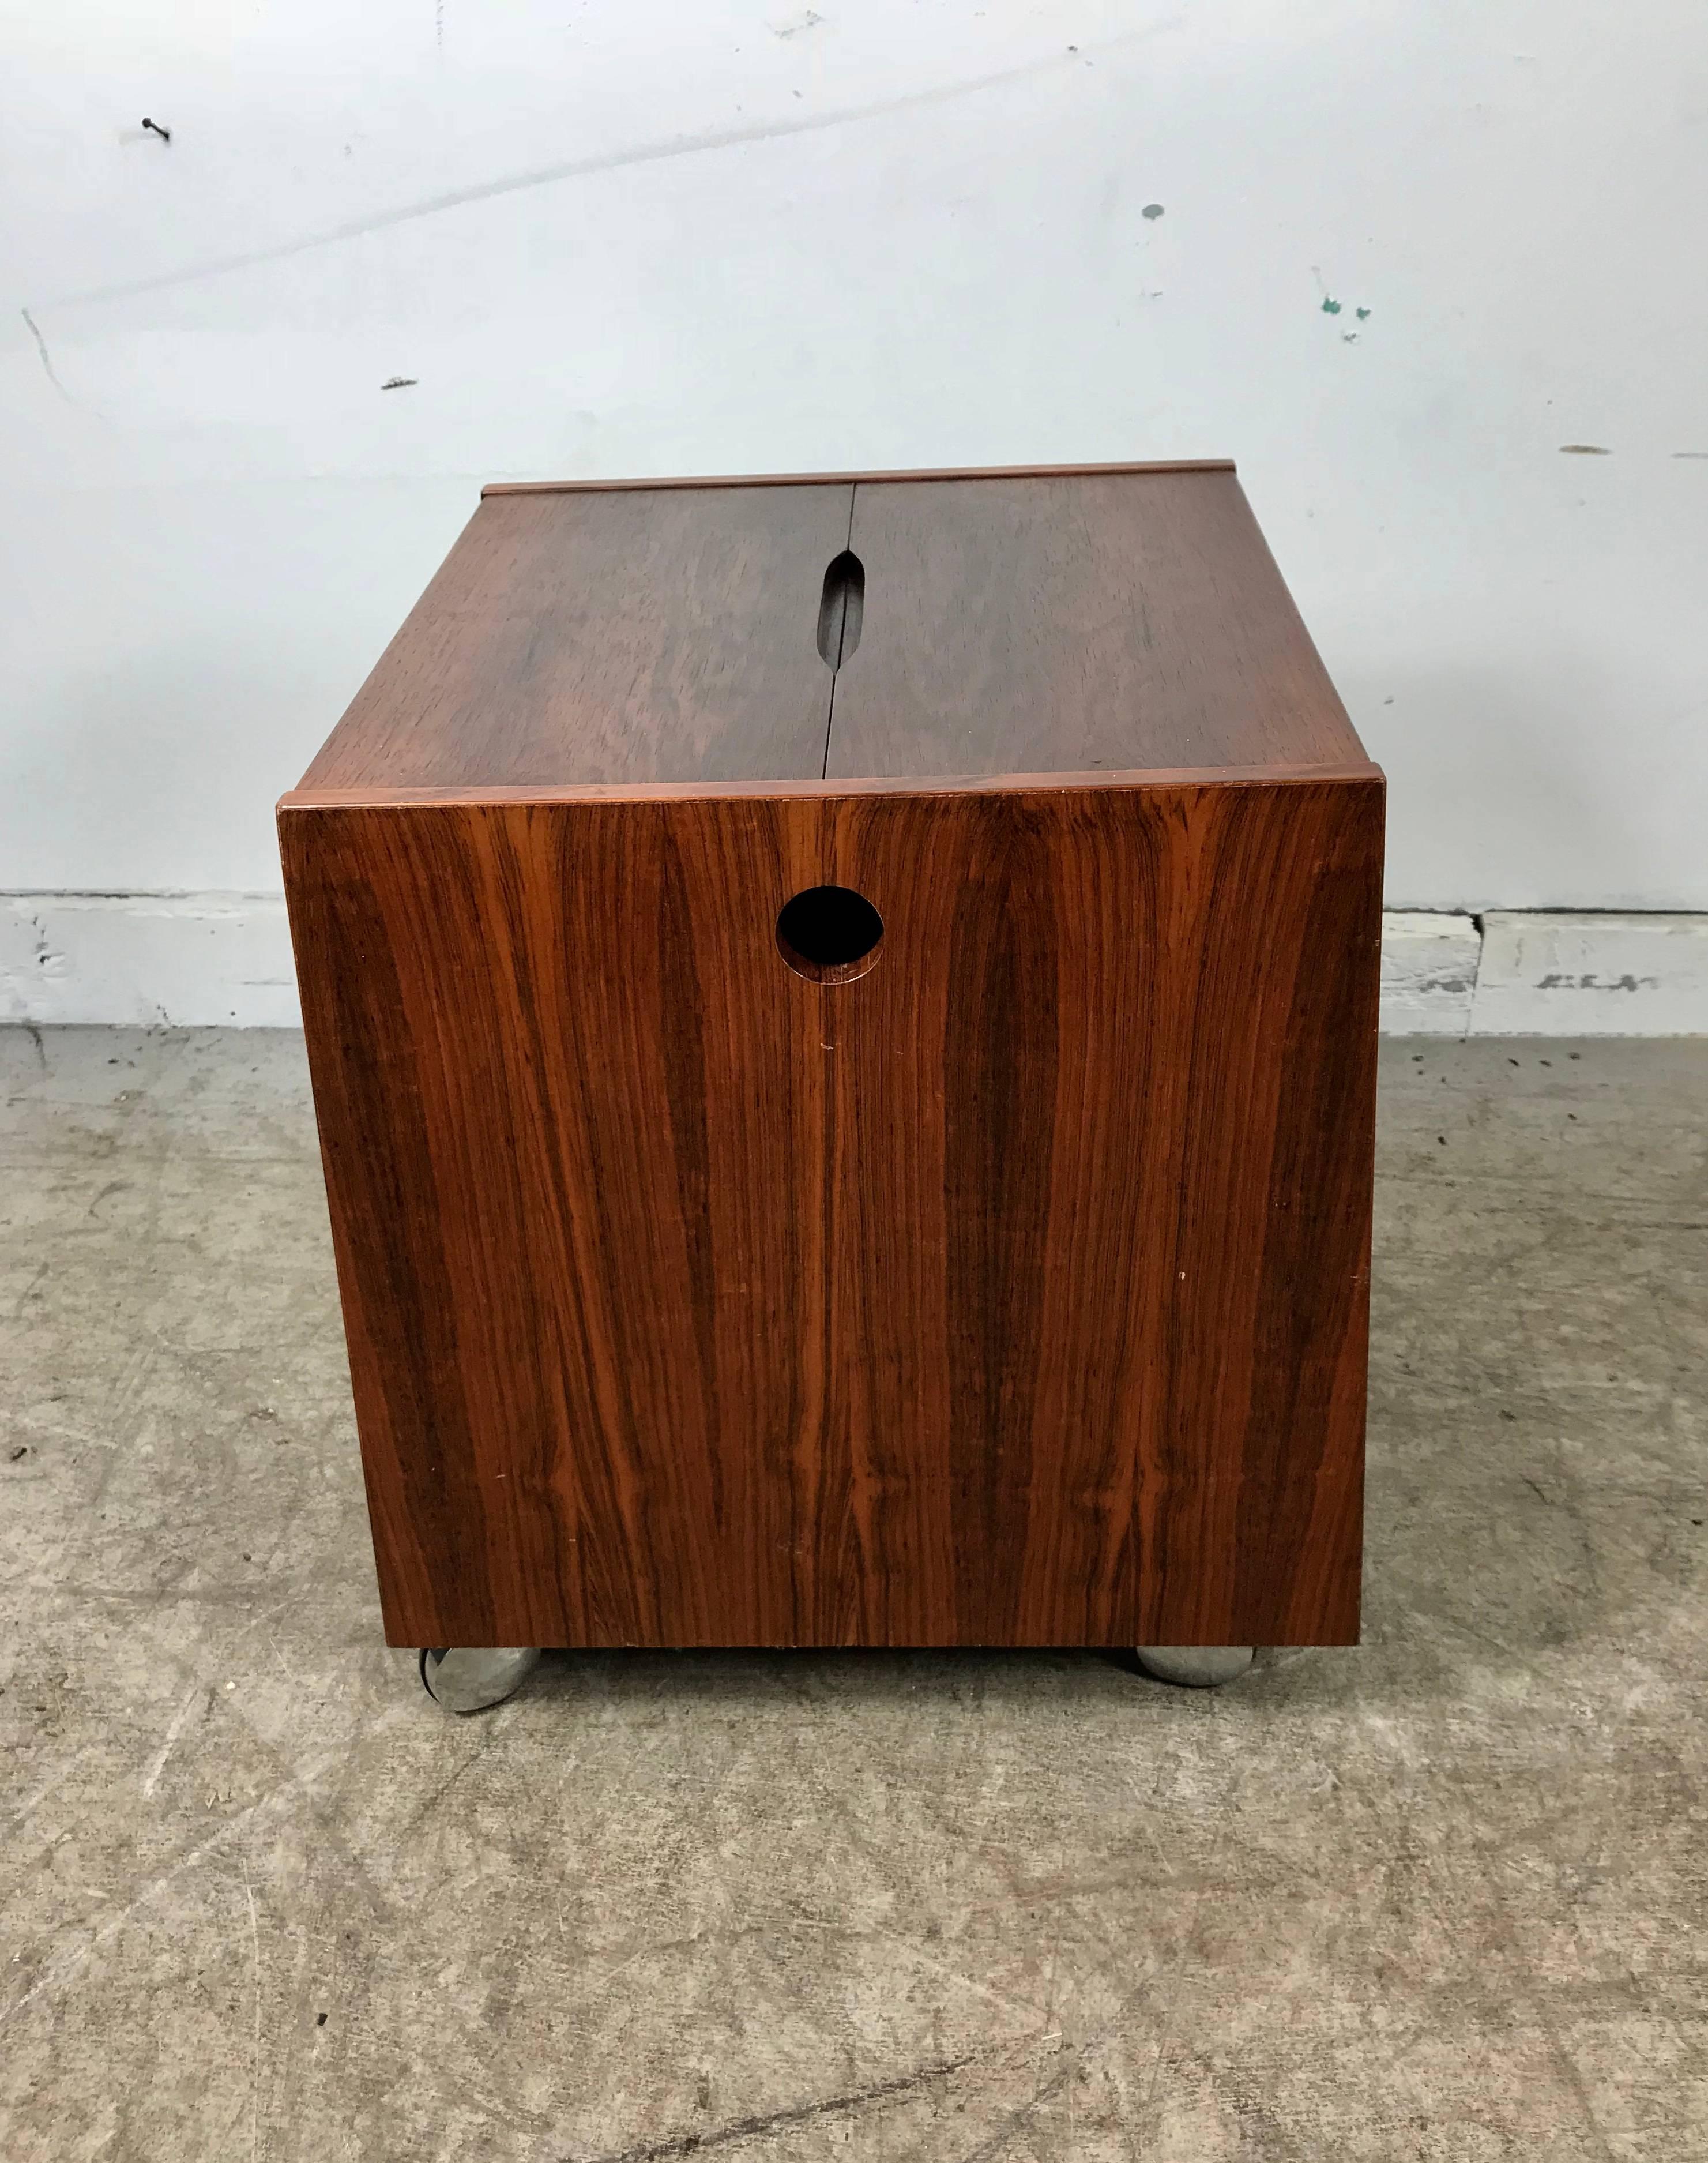 Gorgeous Rolf Hesland rosewood sewing box by Bruksbo of Norway. Classic Scandinavian design, superior quality and construction. Amazing design, top measures 13 x 13
.5 open measures 27.5.